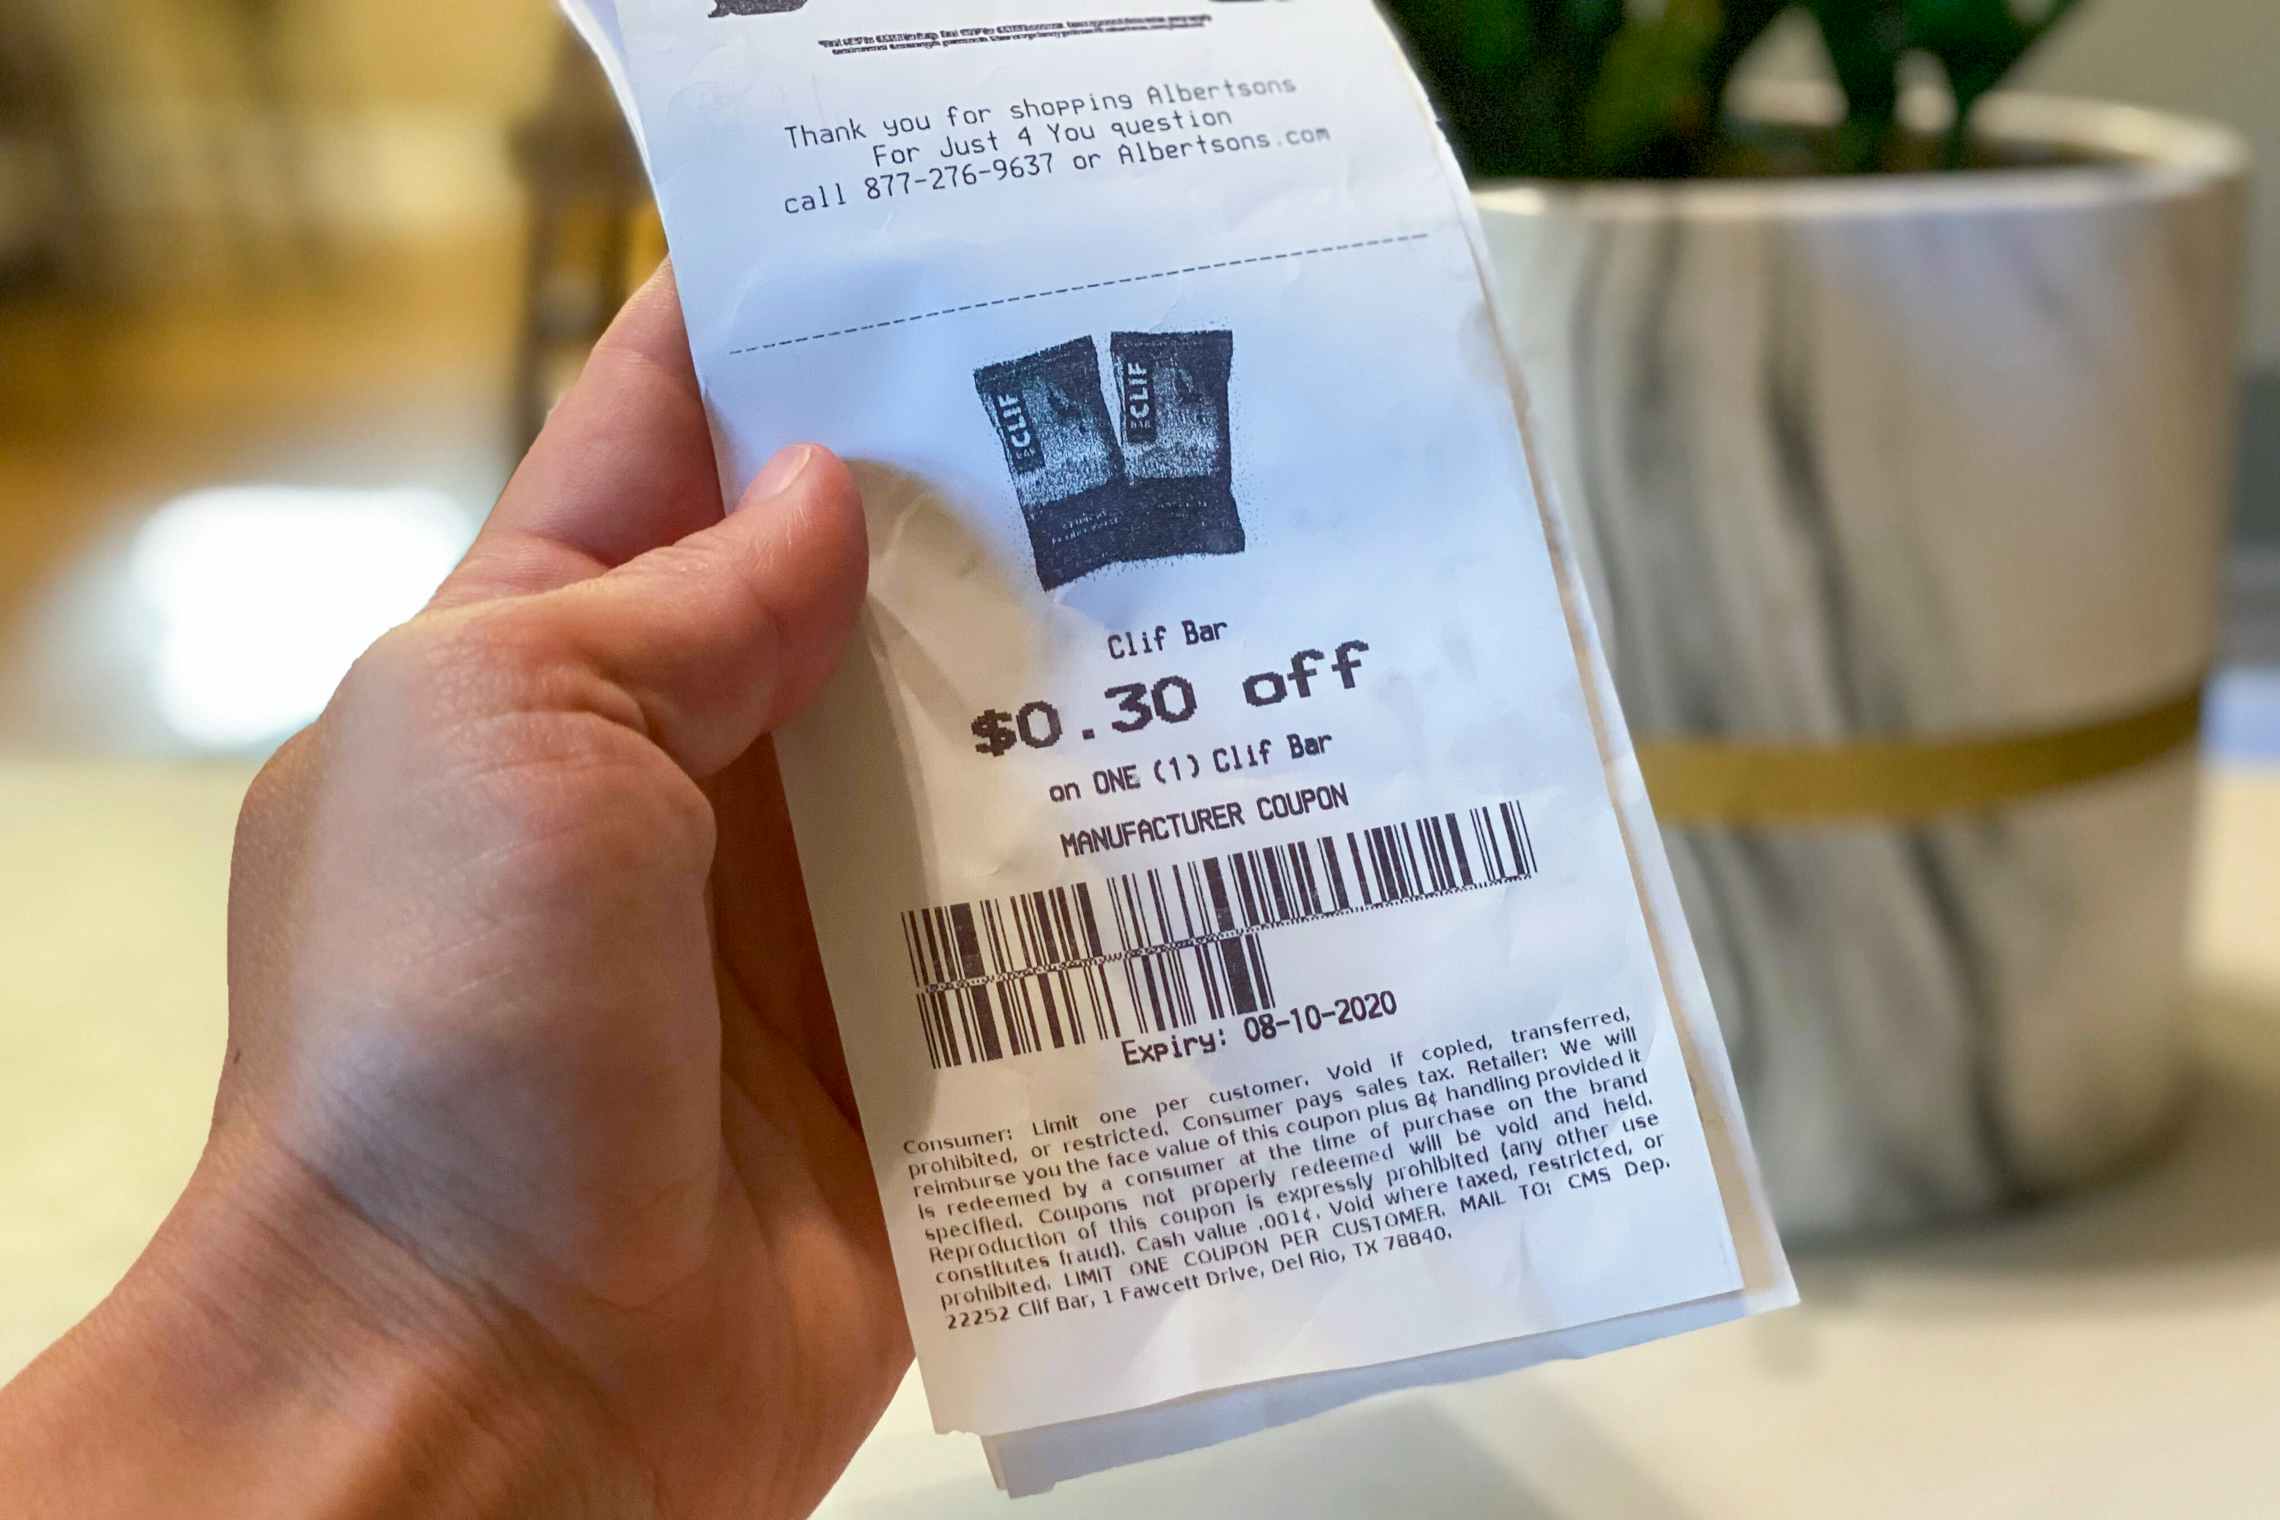 A person holding an Albertsons with a clif bad coupon printed on the bottom.